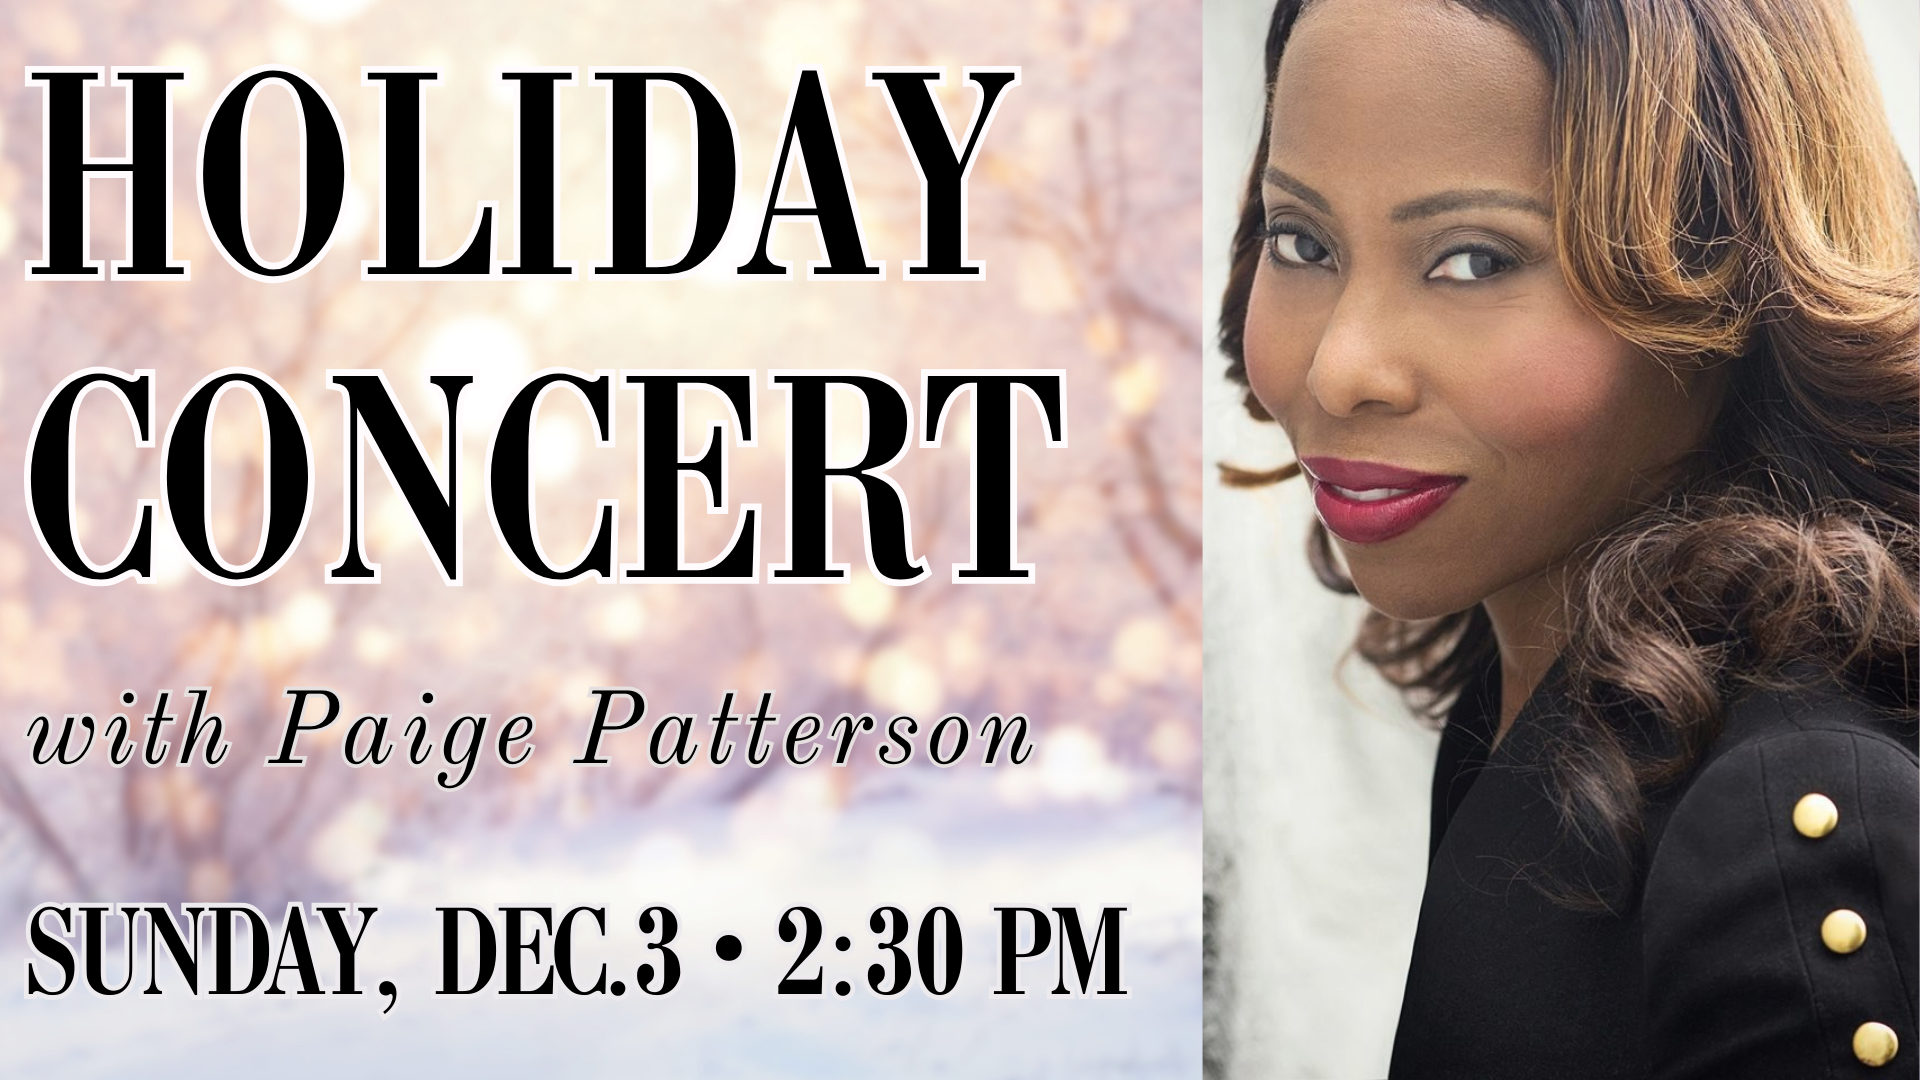 Holiday Concert with Paige Patterson